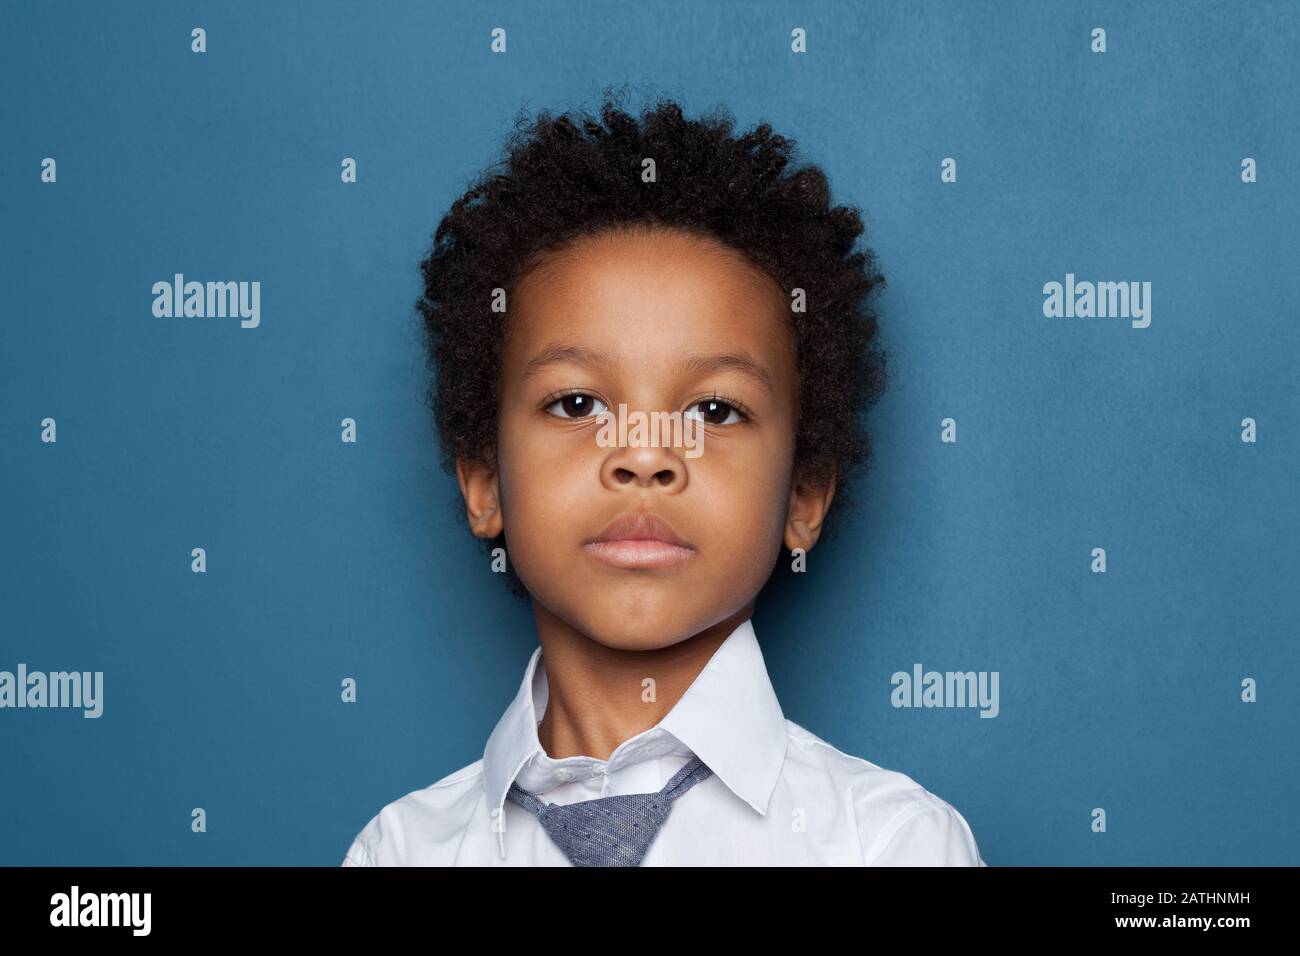 Portrait of curious smart black child boy student on blue background. African American kid pupil 6 years old Stock Photo